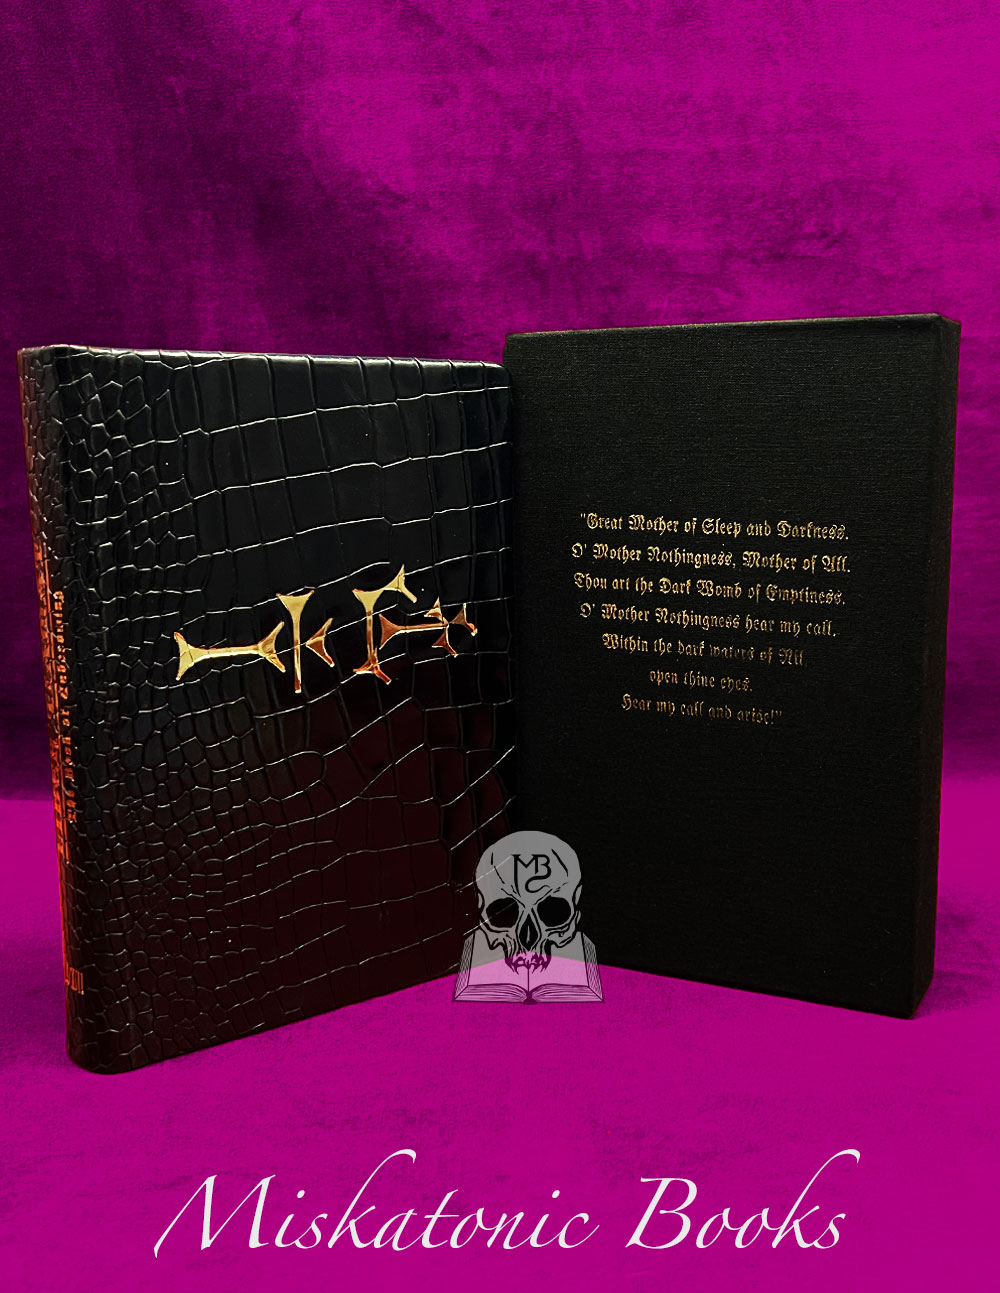 LIBER TIAMAT: The Book of Unbecoming by XI/XIII - Deluxe Leather Bound Limited Edition Hardcover in Custom Slipcase